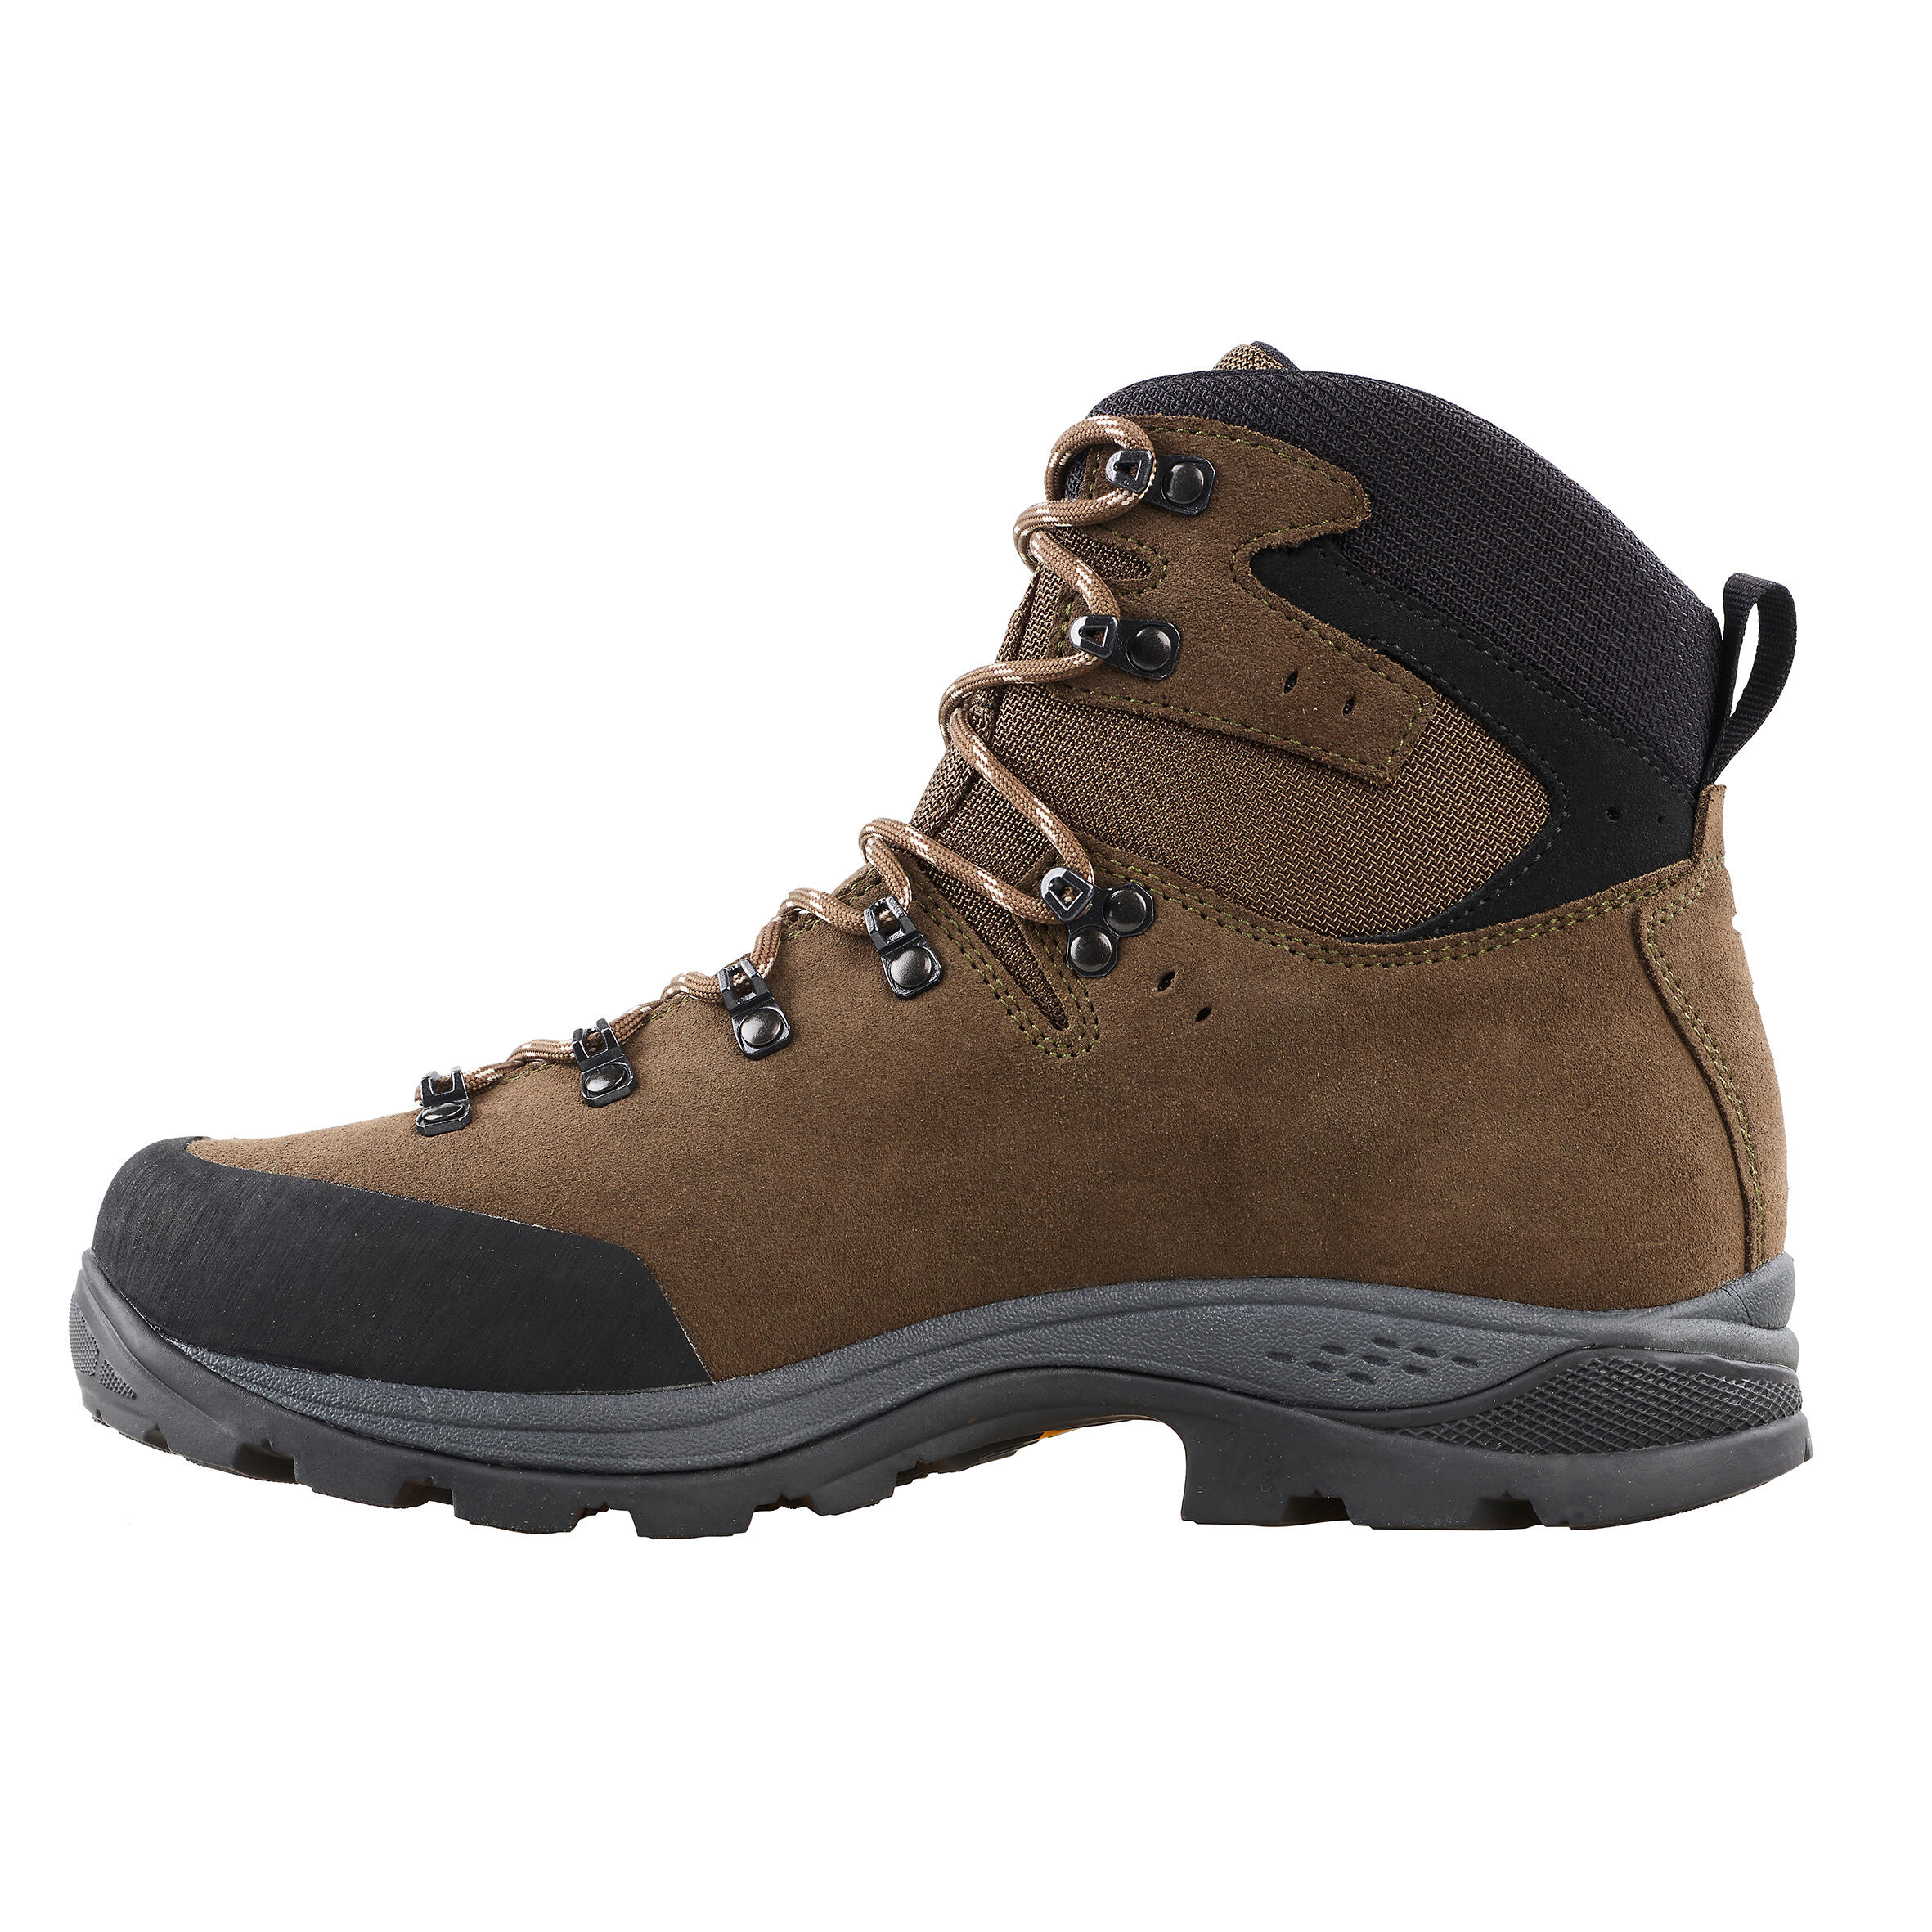 Waterproof Country Sport Boots Asolo X-Hunt Forest Gore-Tex Vibram 3/14